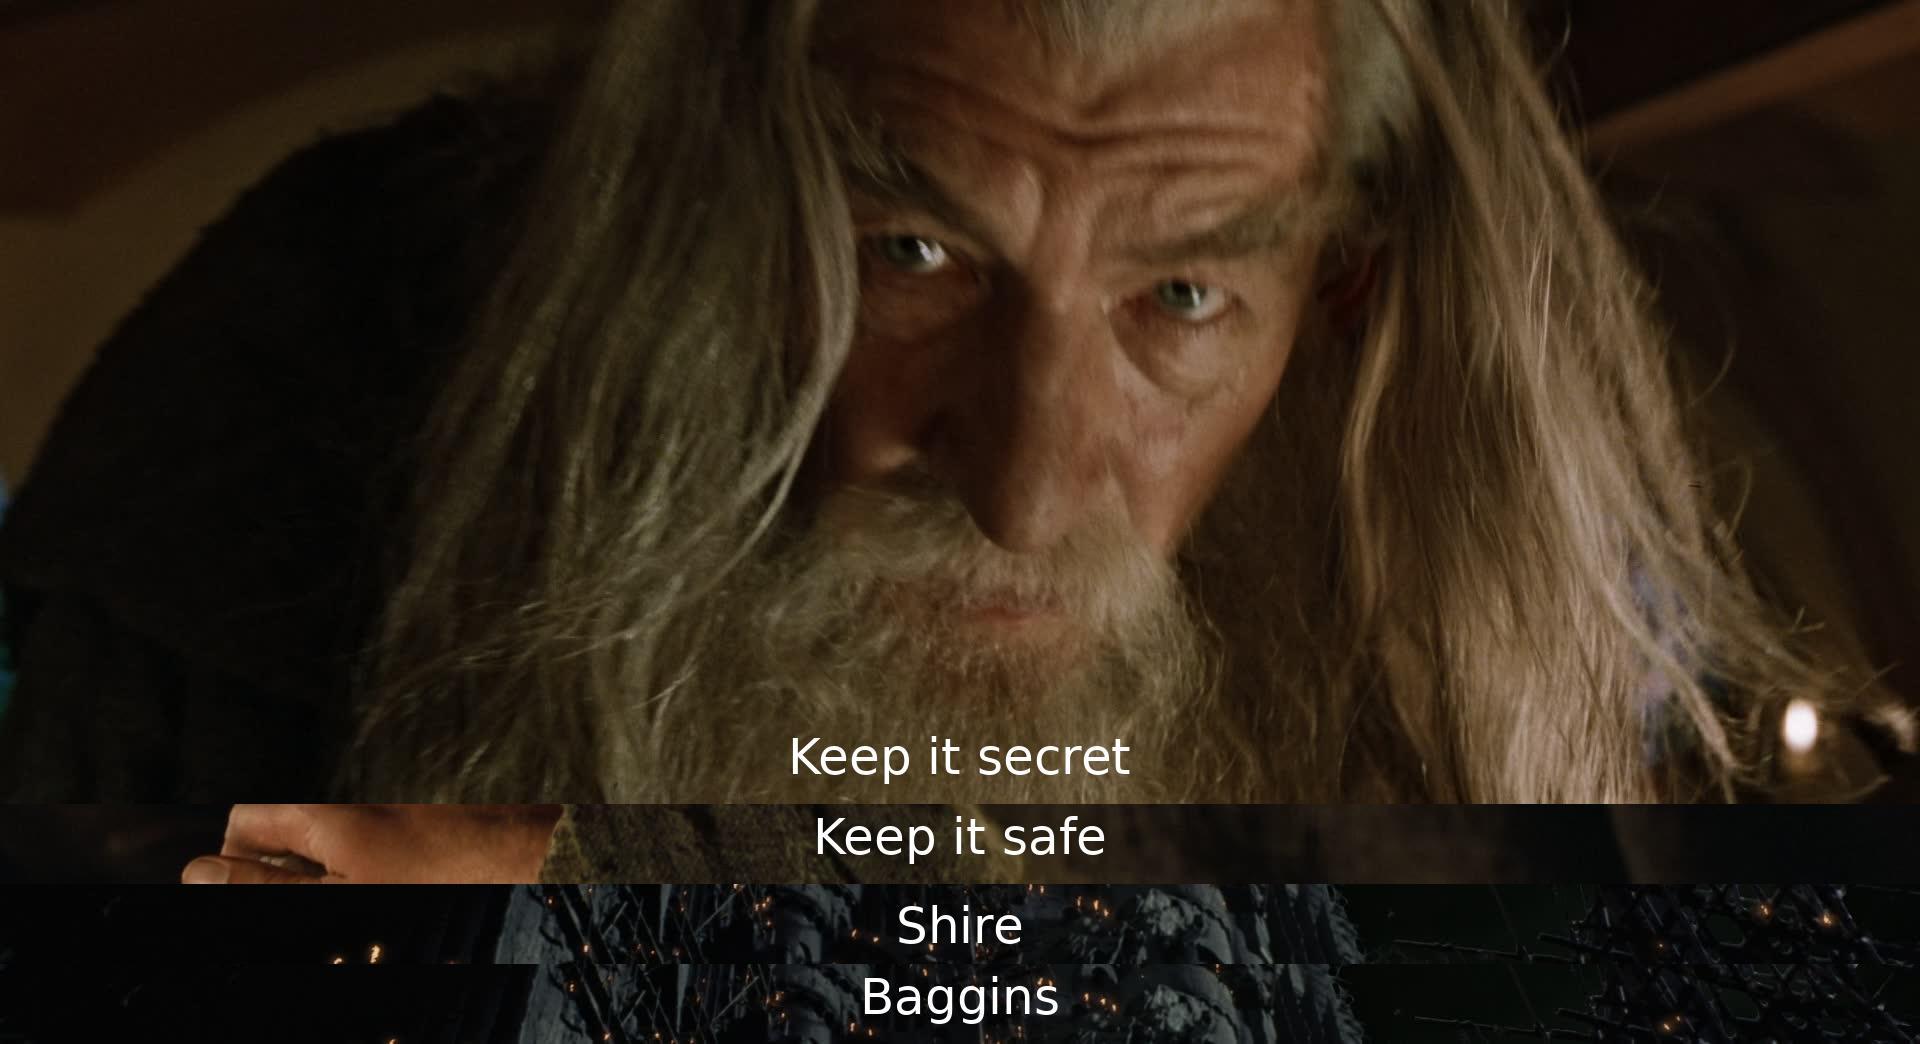 In the dialogue, a character urges another to keep something hidden and protected in a place called the Shire, belonging to a person named Baggins. The emphasis is on secrecy and safety for the mentioned item.